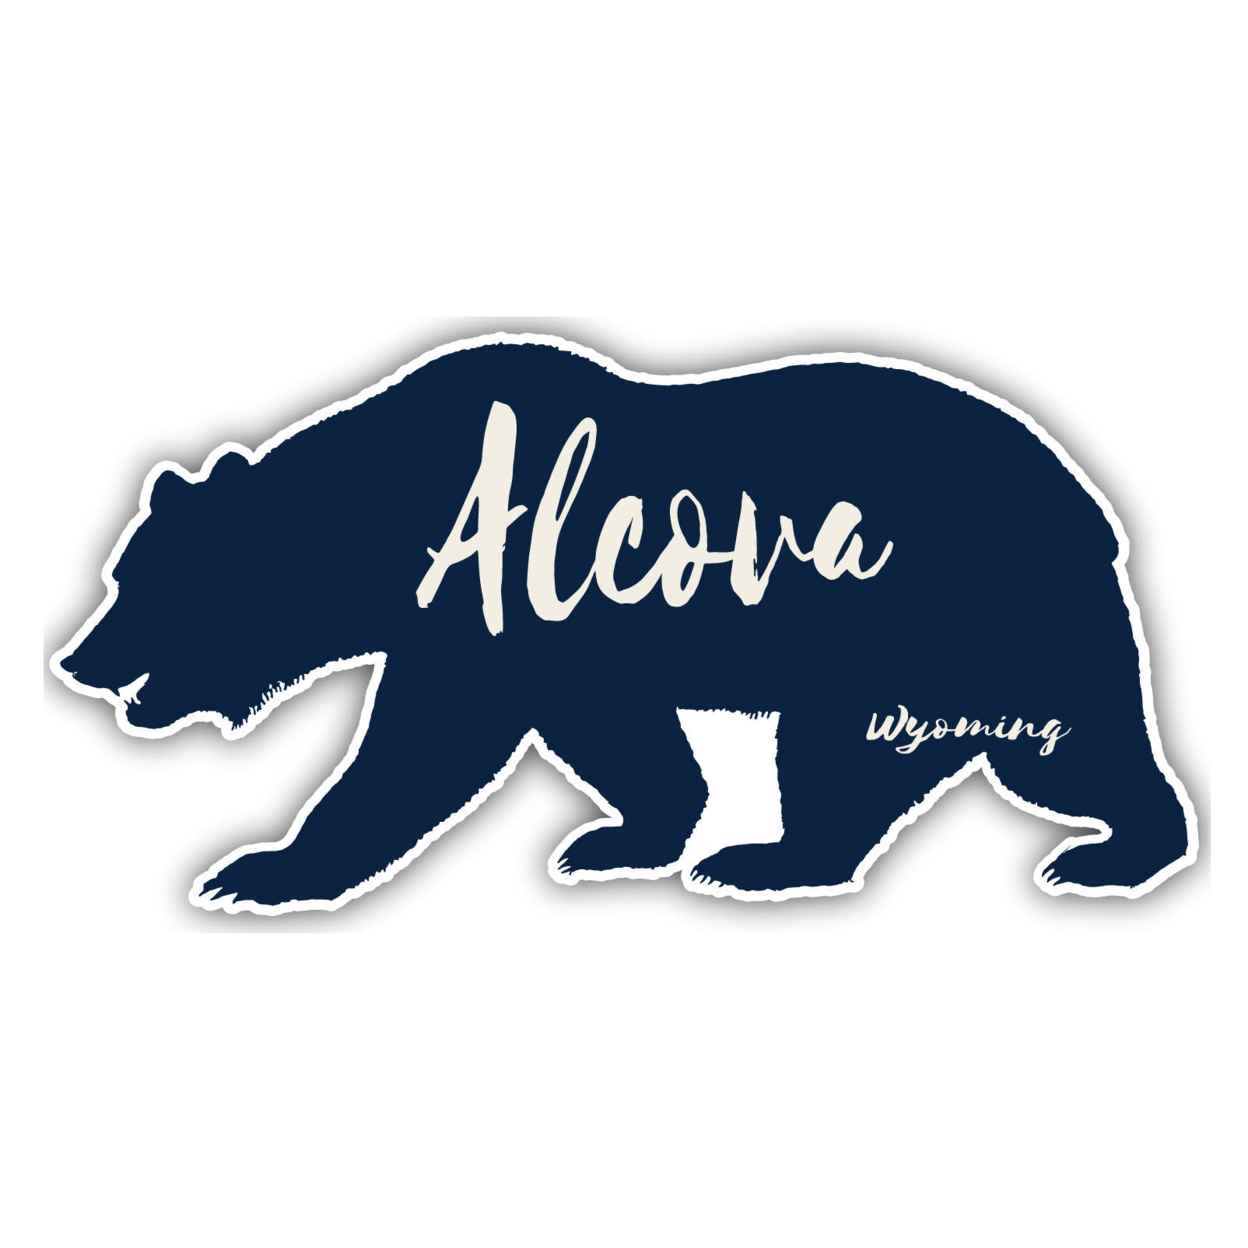 Alcova Wyoming Souvenir Decorative Stickers (Choose Theme And Size) - 4-Pack, 4-Inch, Bear